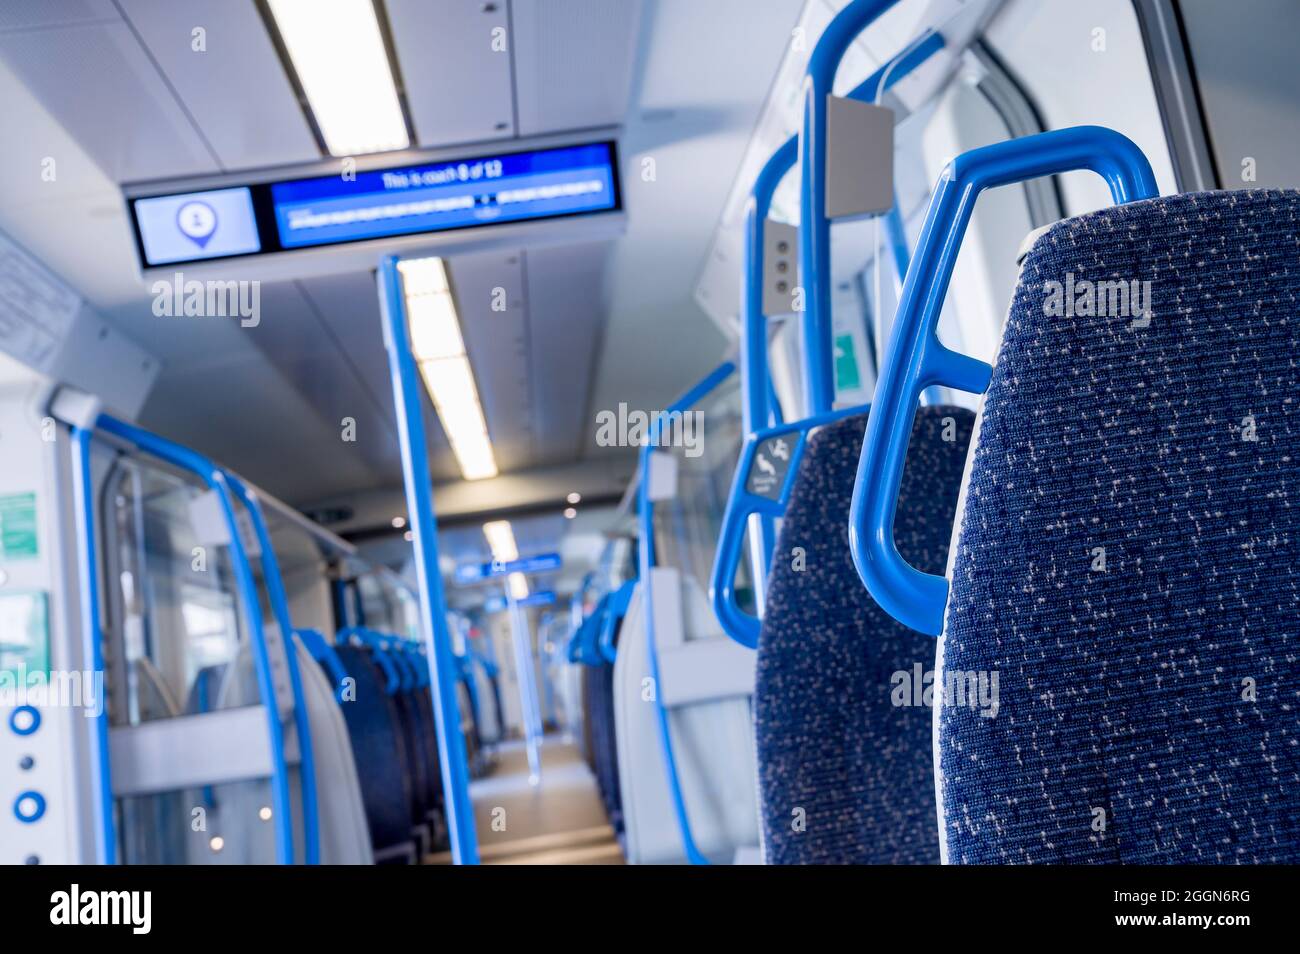 On-board passenger information screen on a class 700 passenger train in the UK. Stock Photo